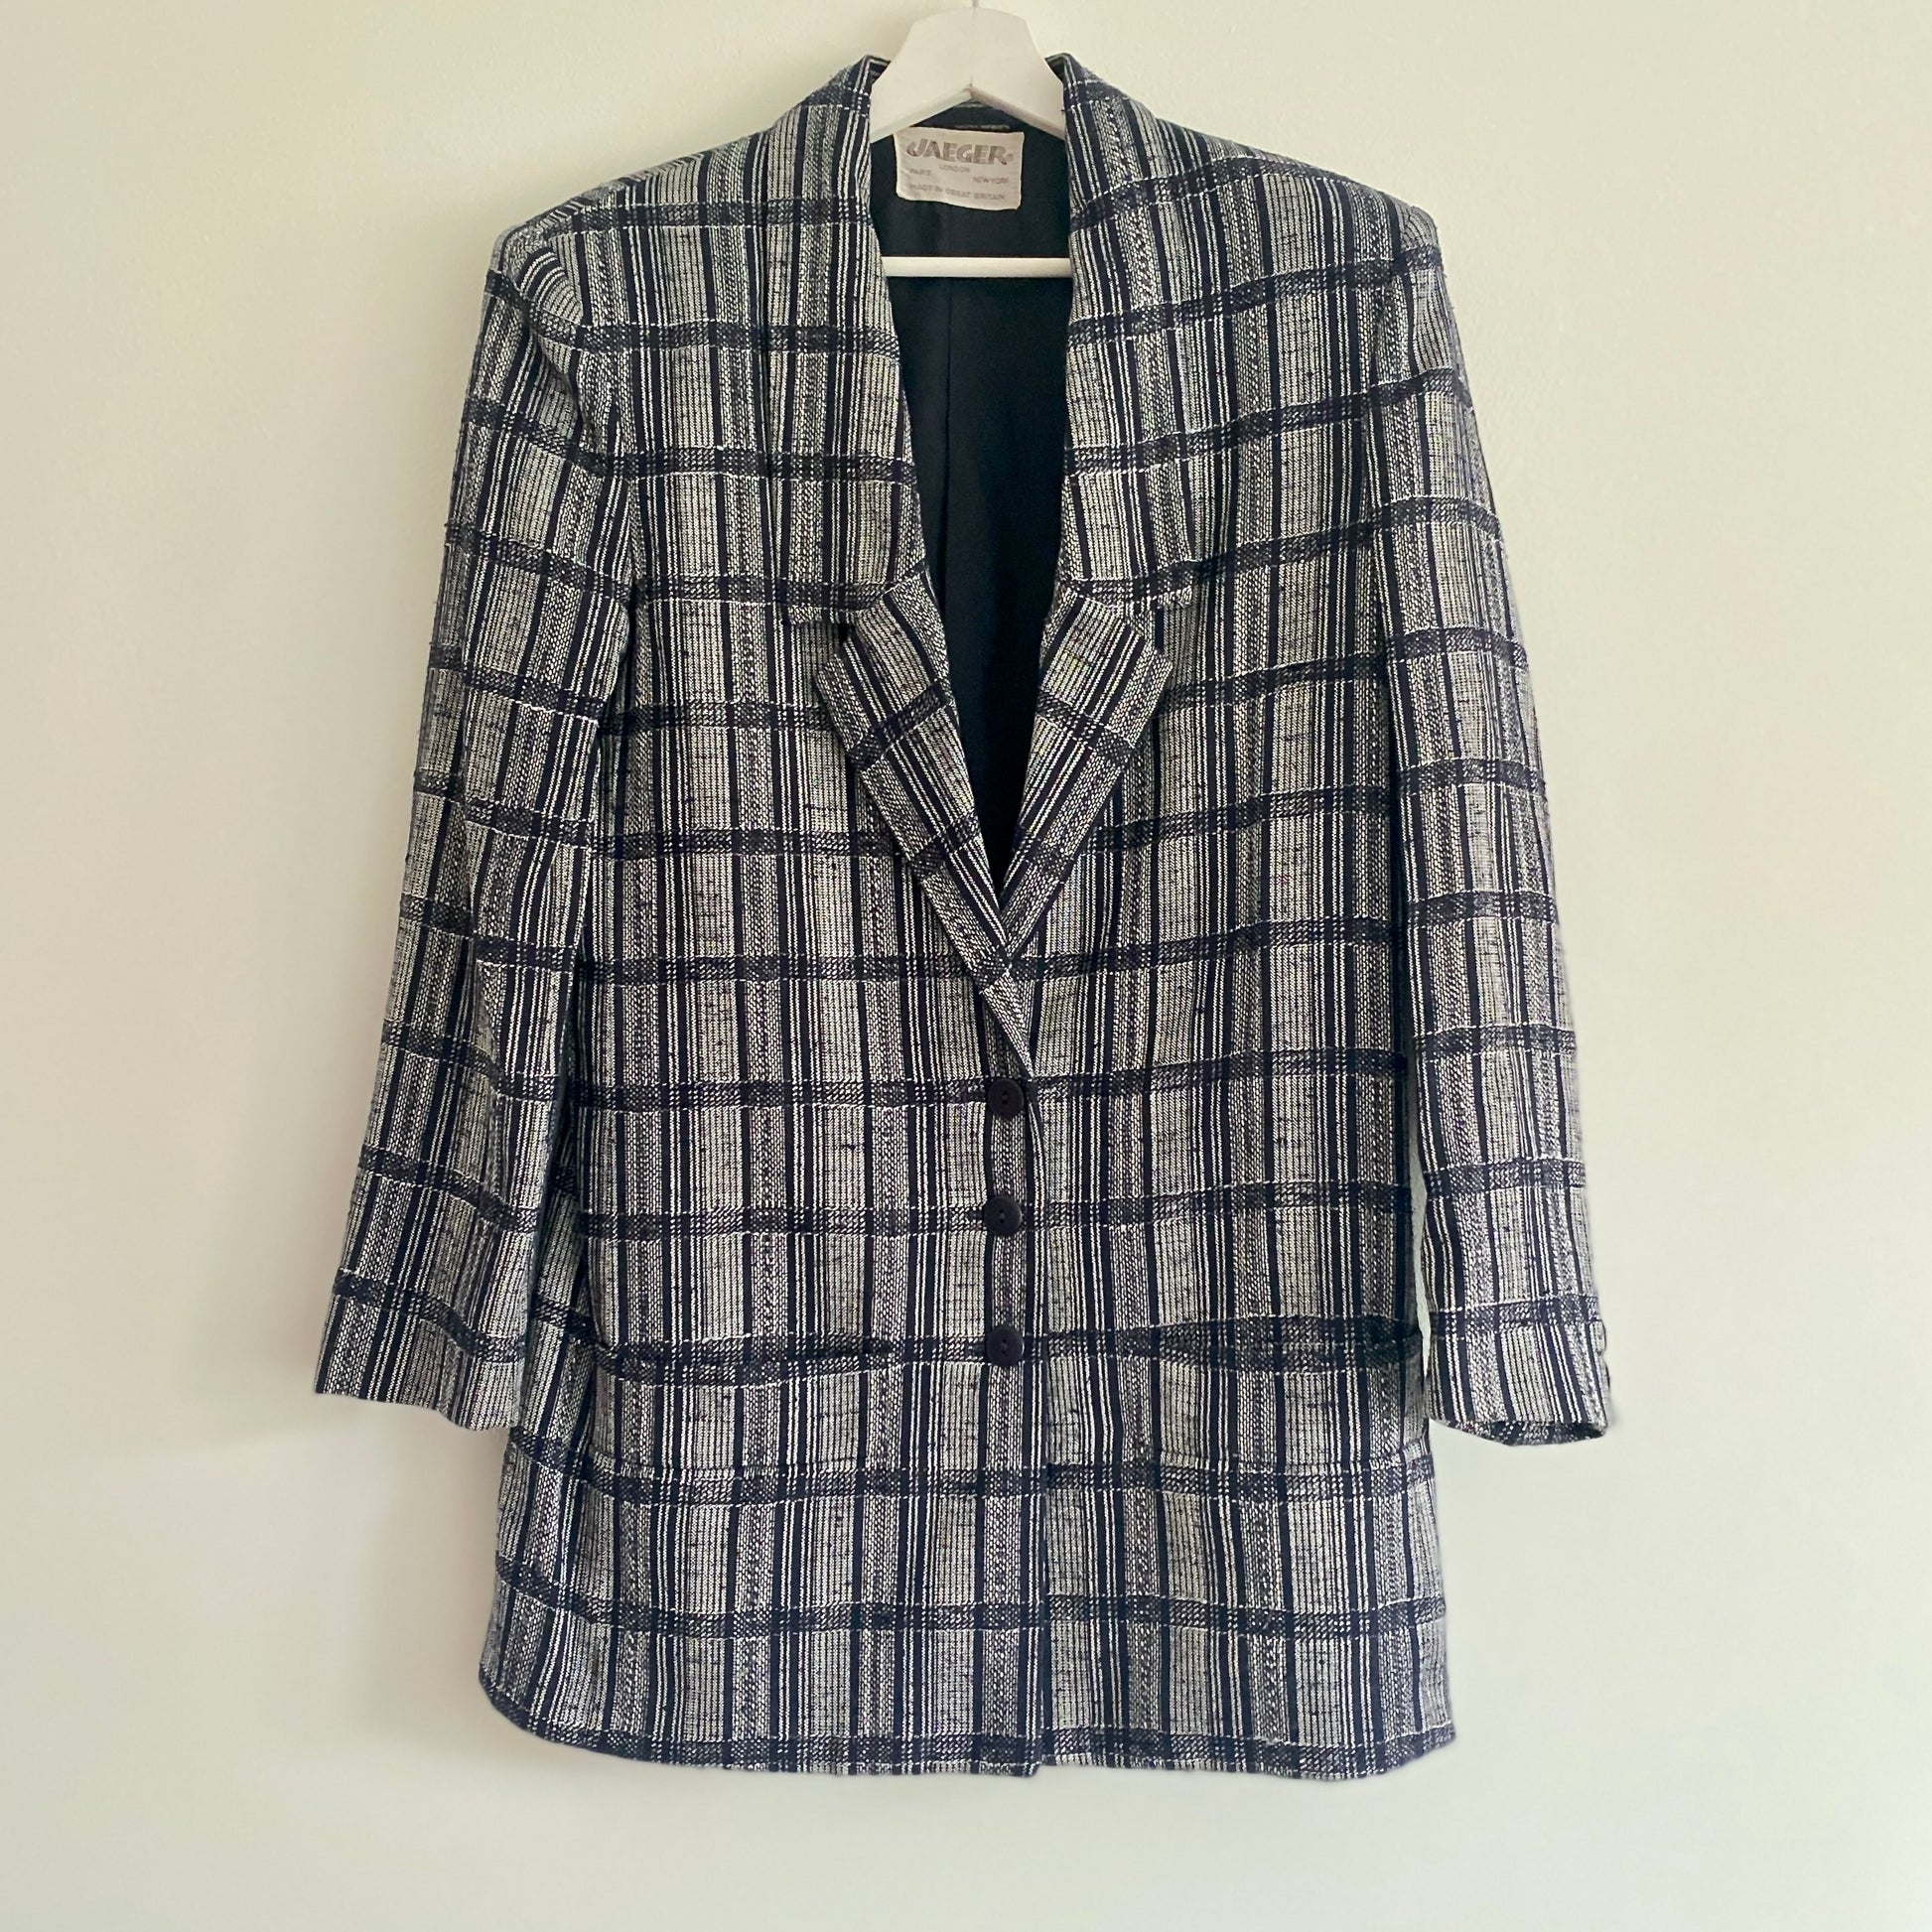 Vintage 80s navy check jacket  By Jaeger Low V neckline  Three button front fastening  Two front pockets Three button decoration to cuffs Shoulder pads